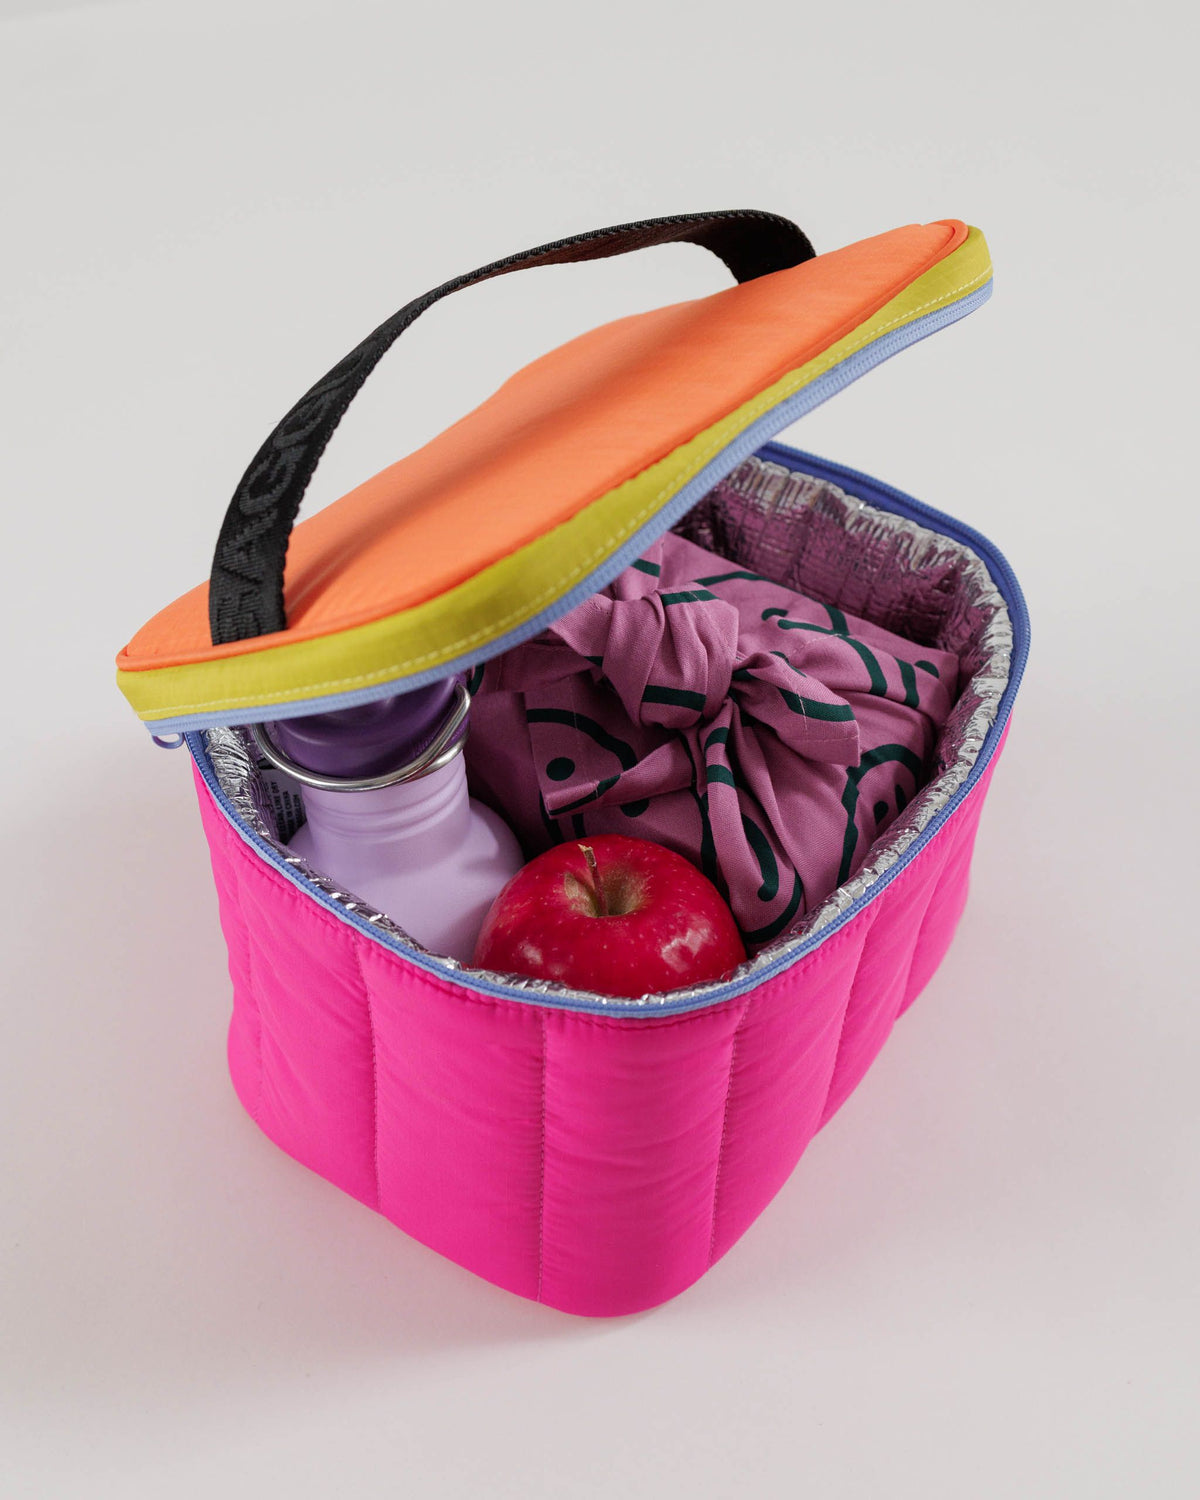 Puffy Lunch Bag - Pink Citrus